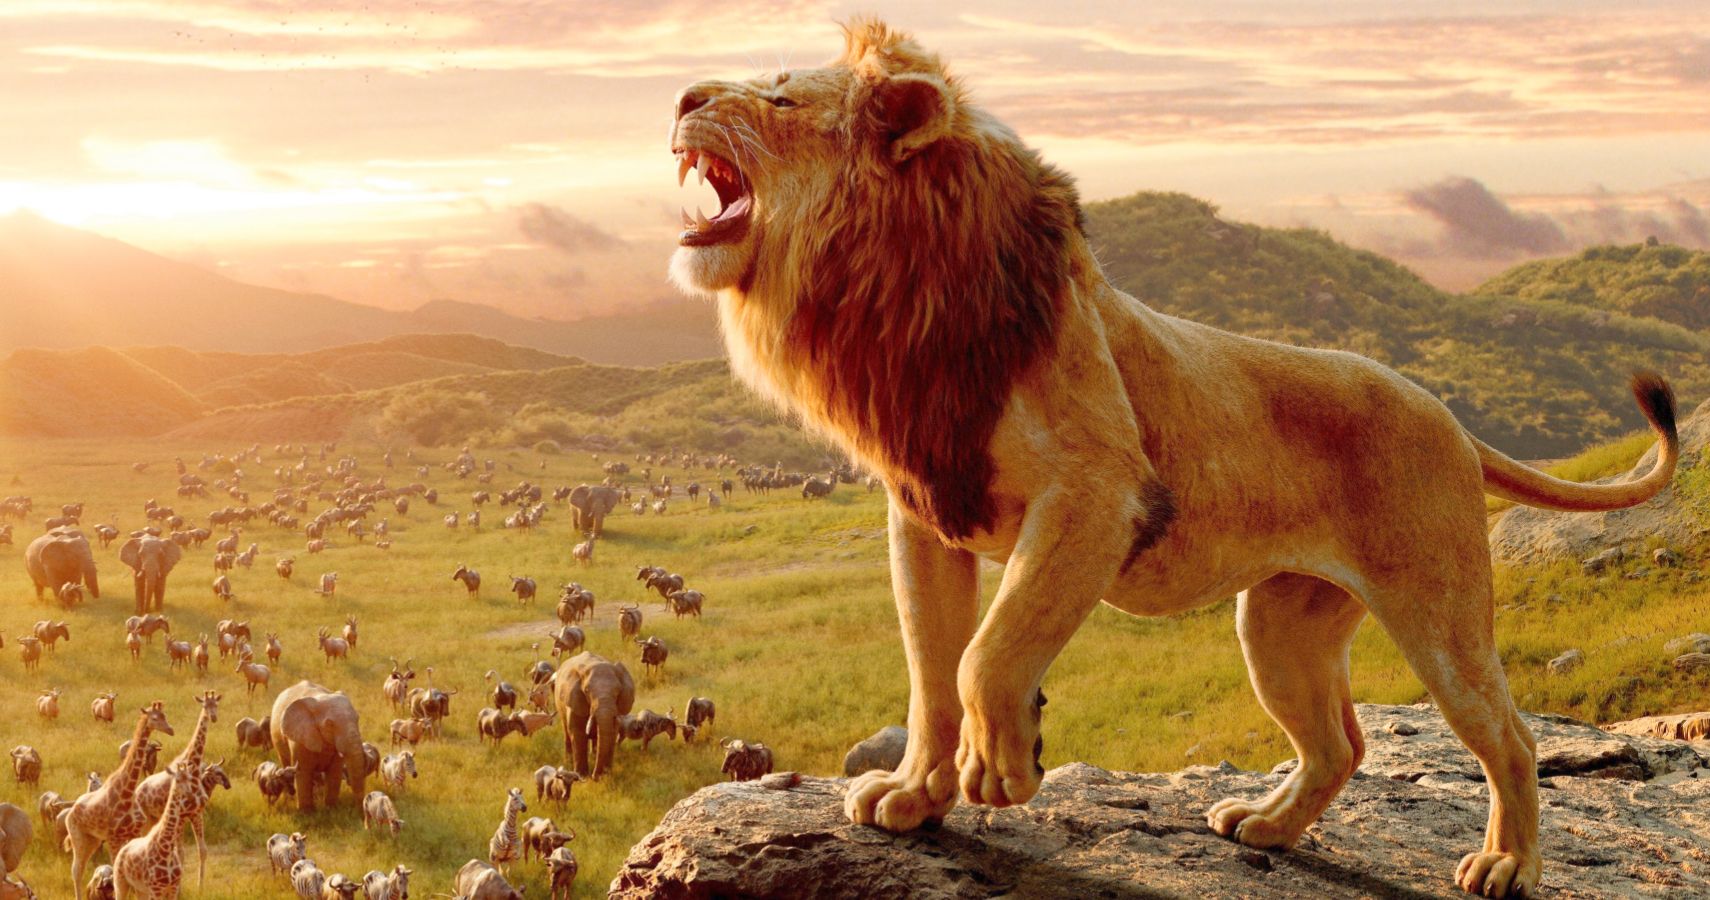 The Lion King Review #2: Both the Good &amp; Bad of Disney Remakes